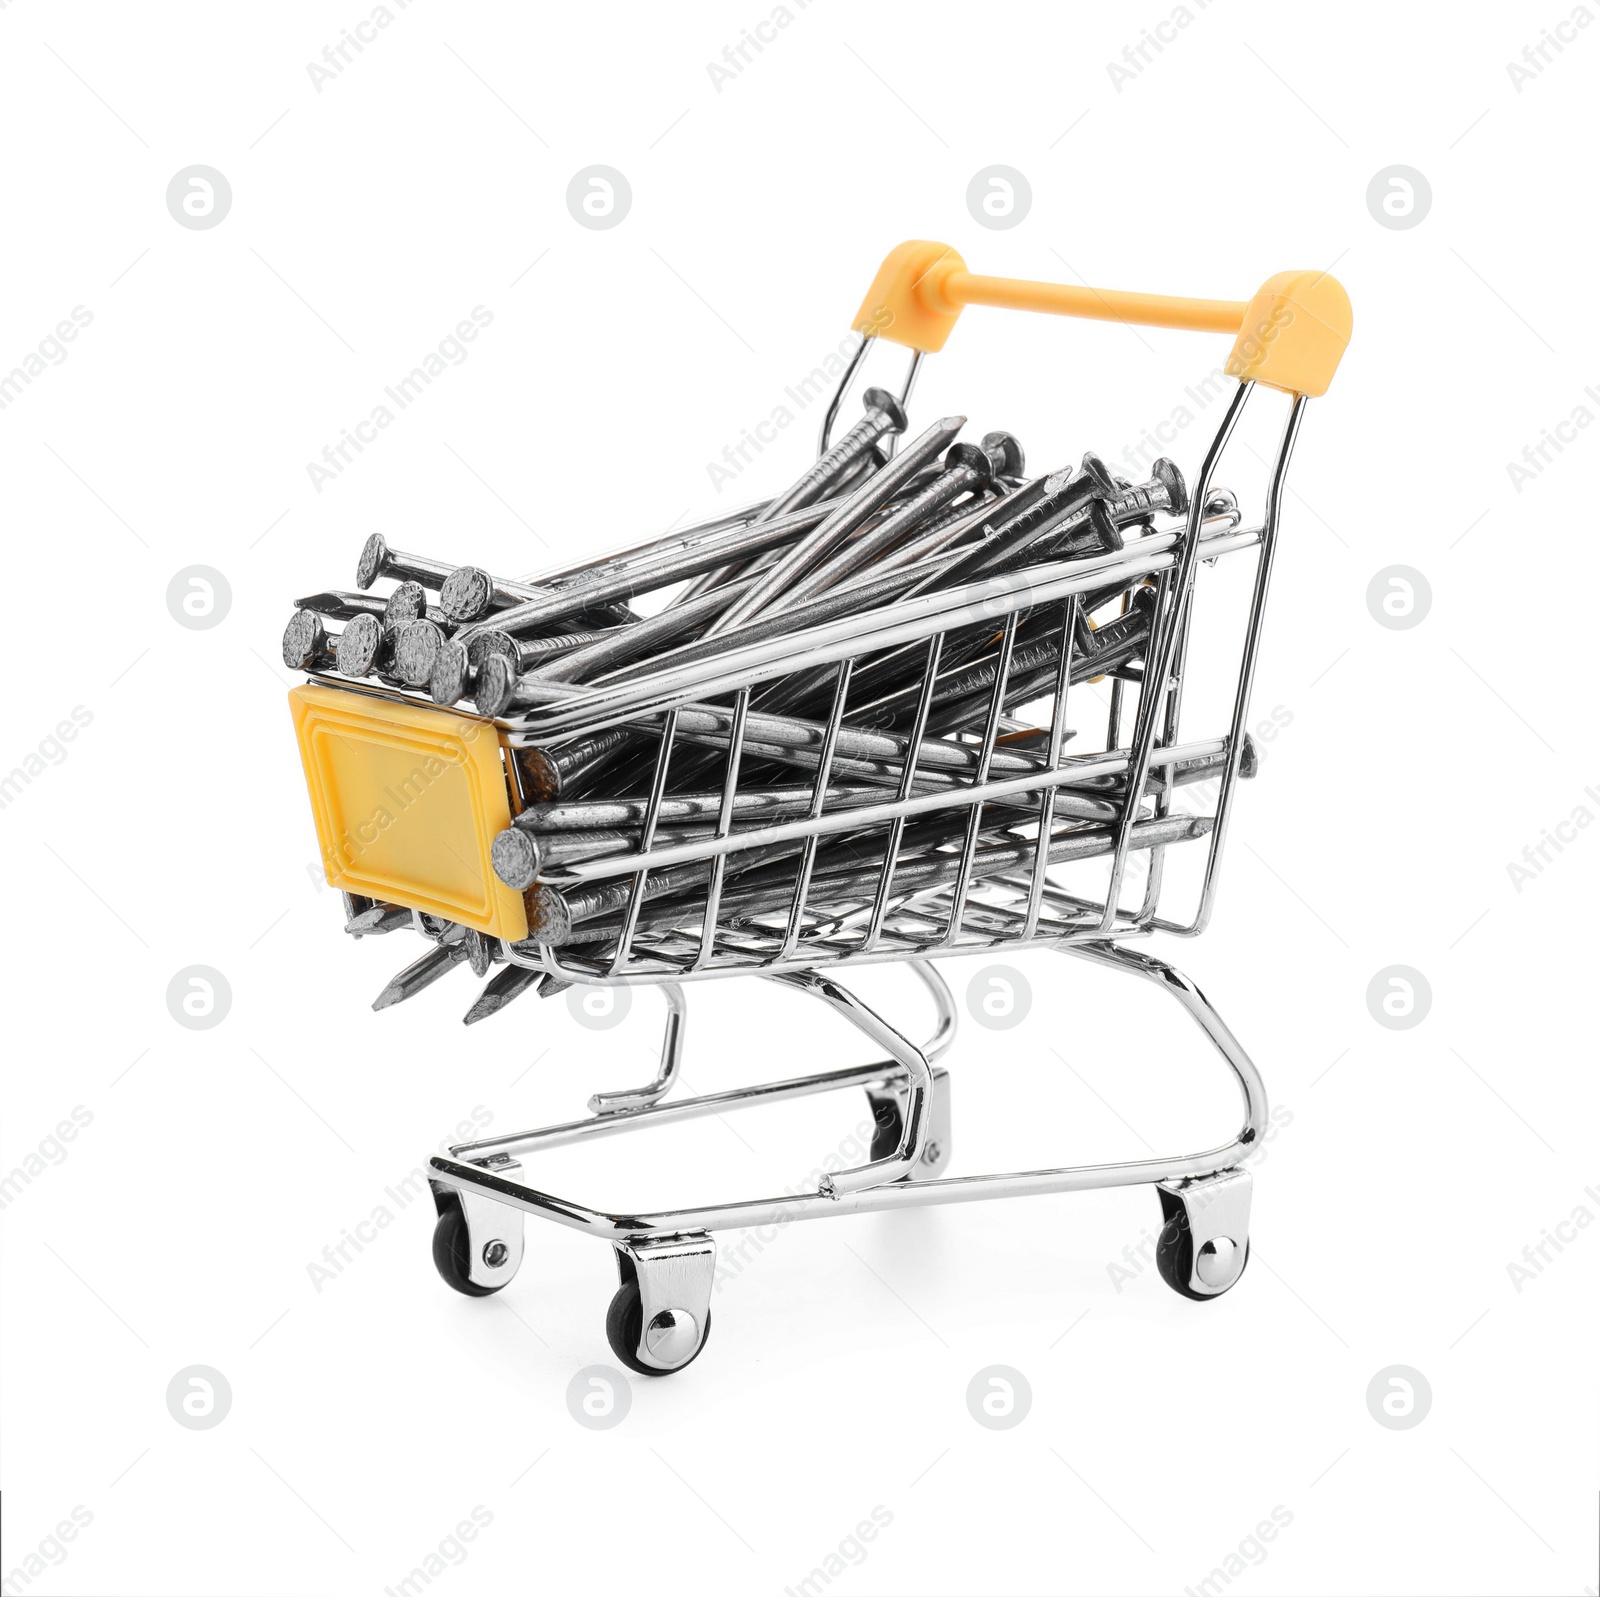 Photo of Metal nails in shopping cart isolated on white